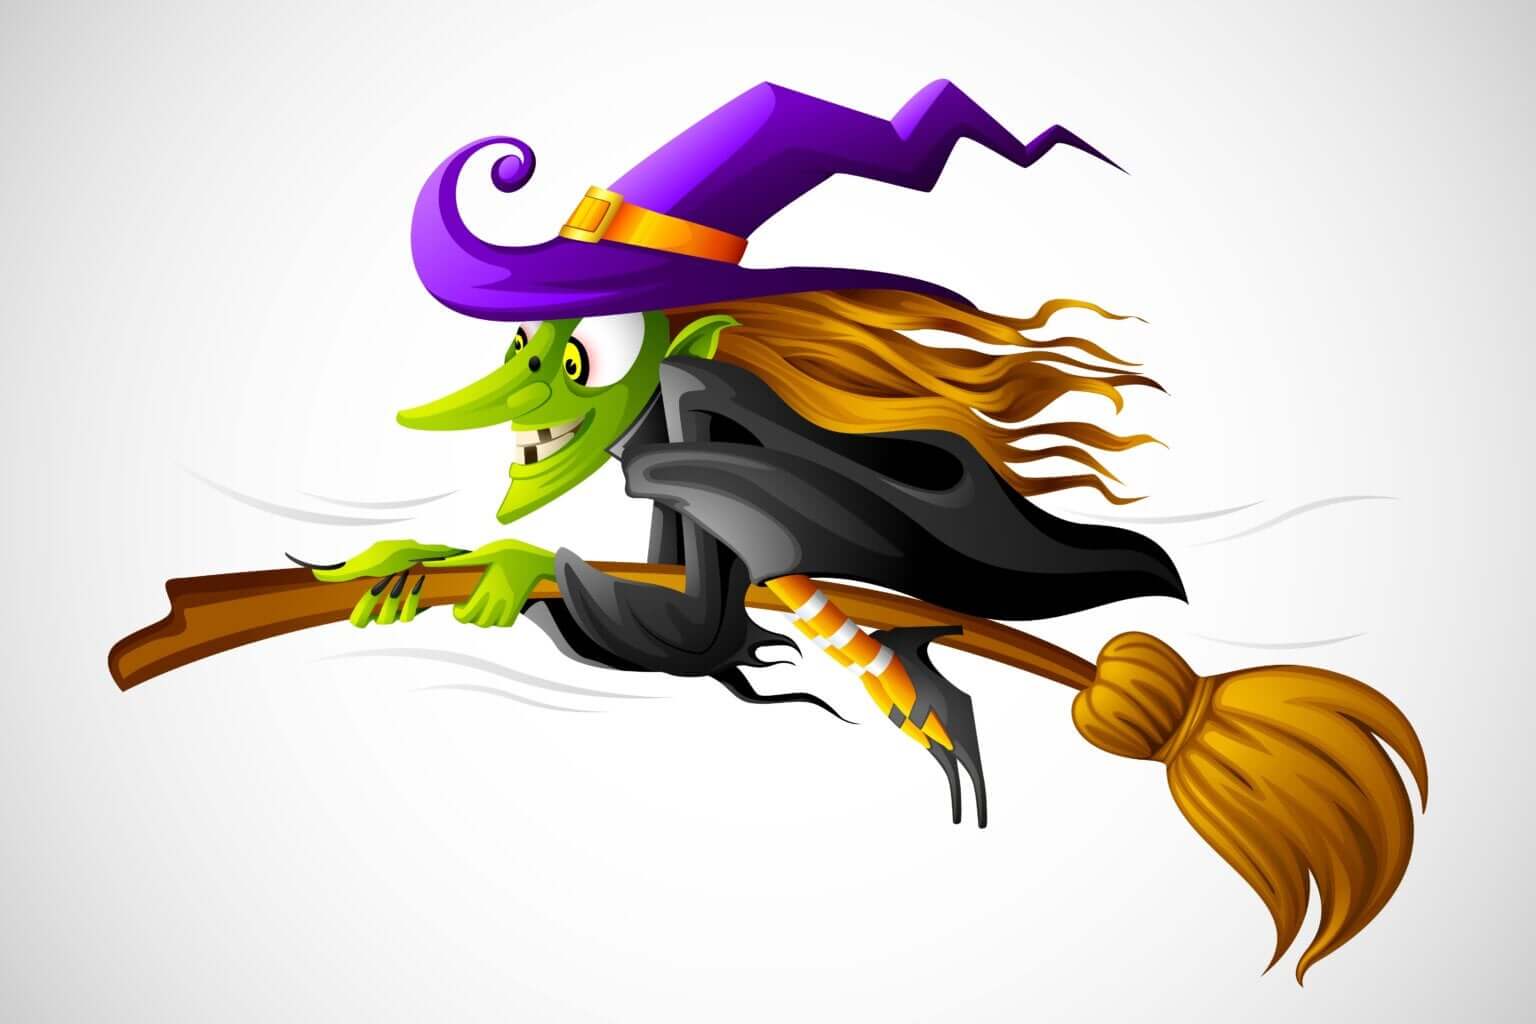 A cartoon drawing of a witch riding on a broom.